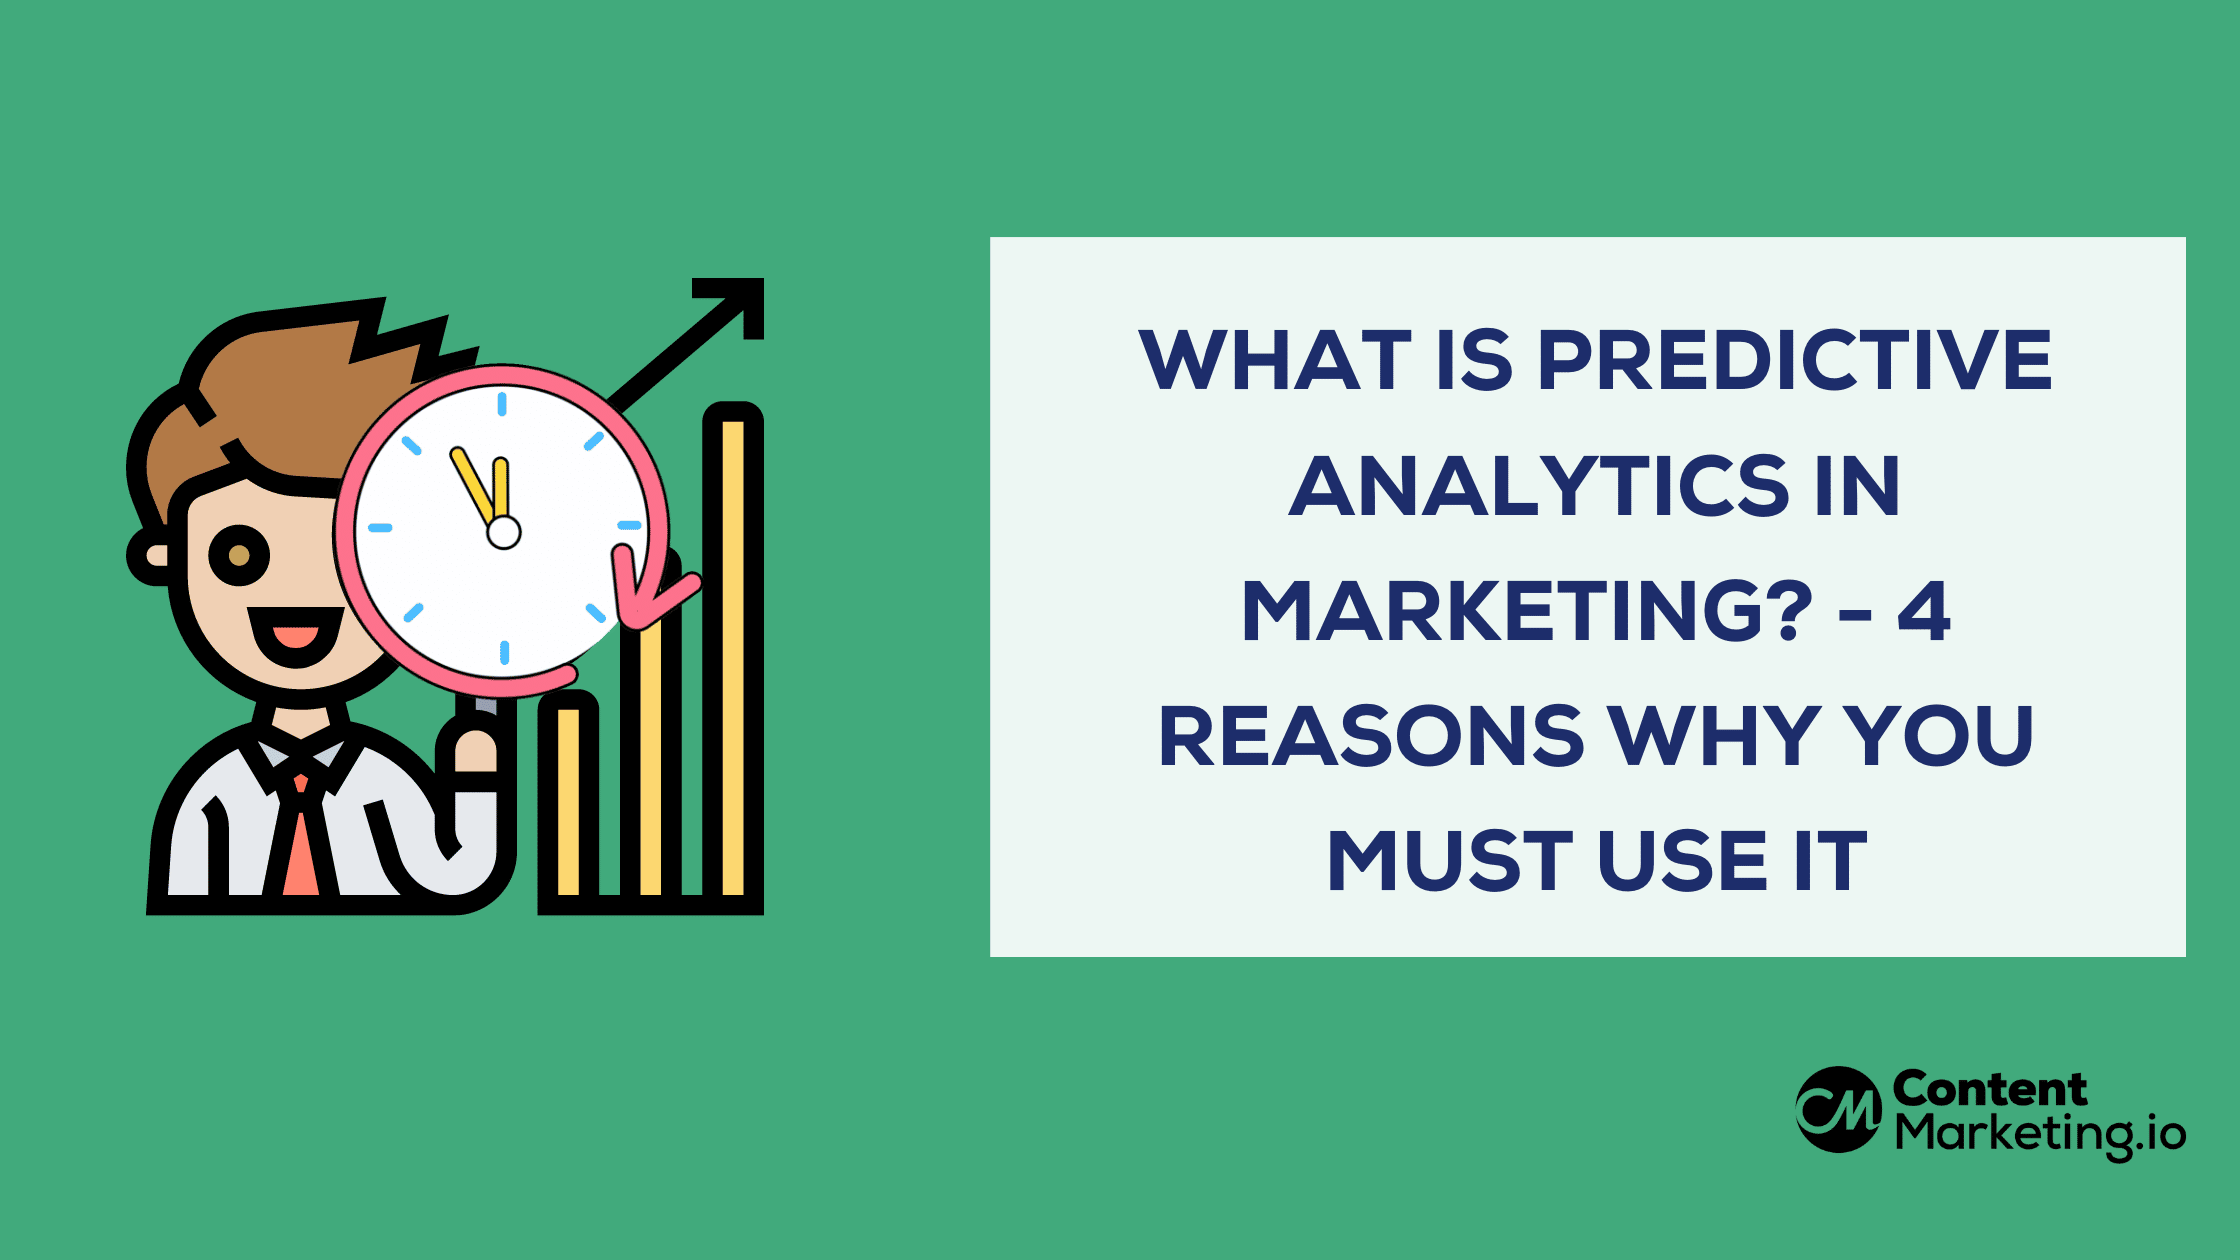 What Is Predictive Analytics in Marketing? 4 Reasons Why You Must Use it